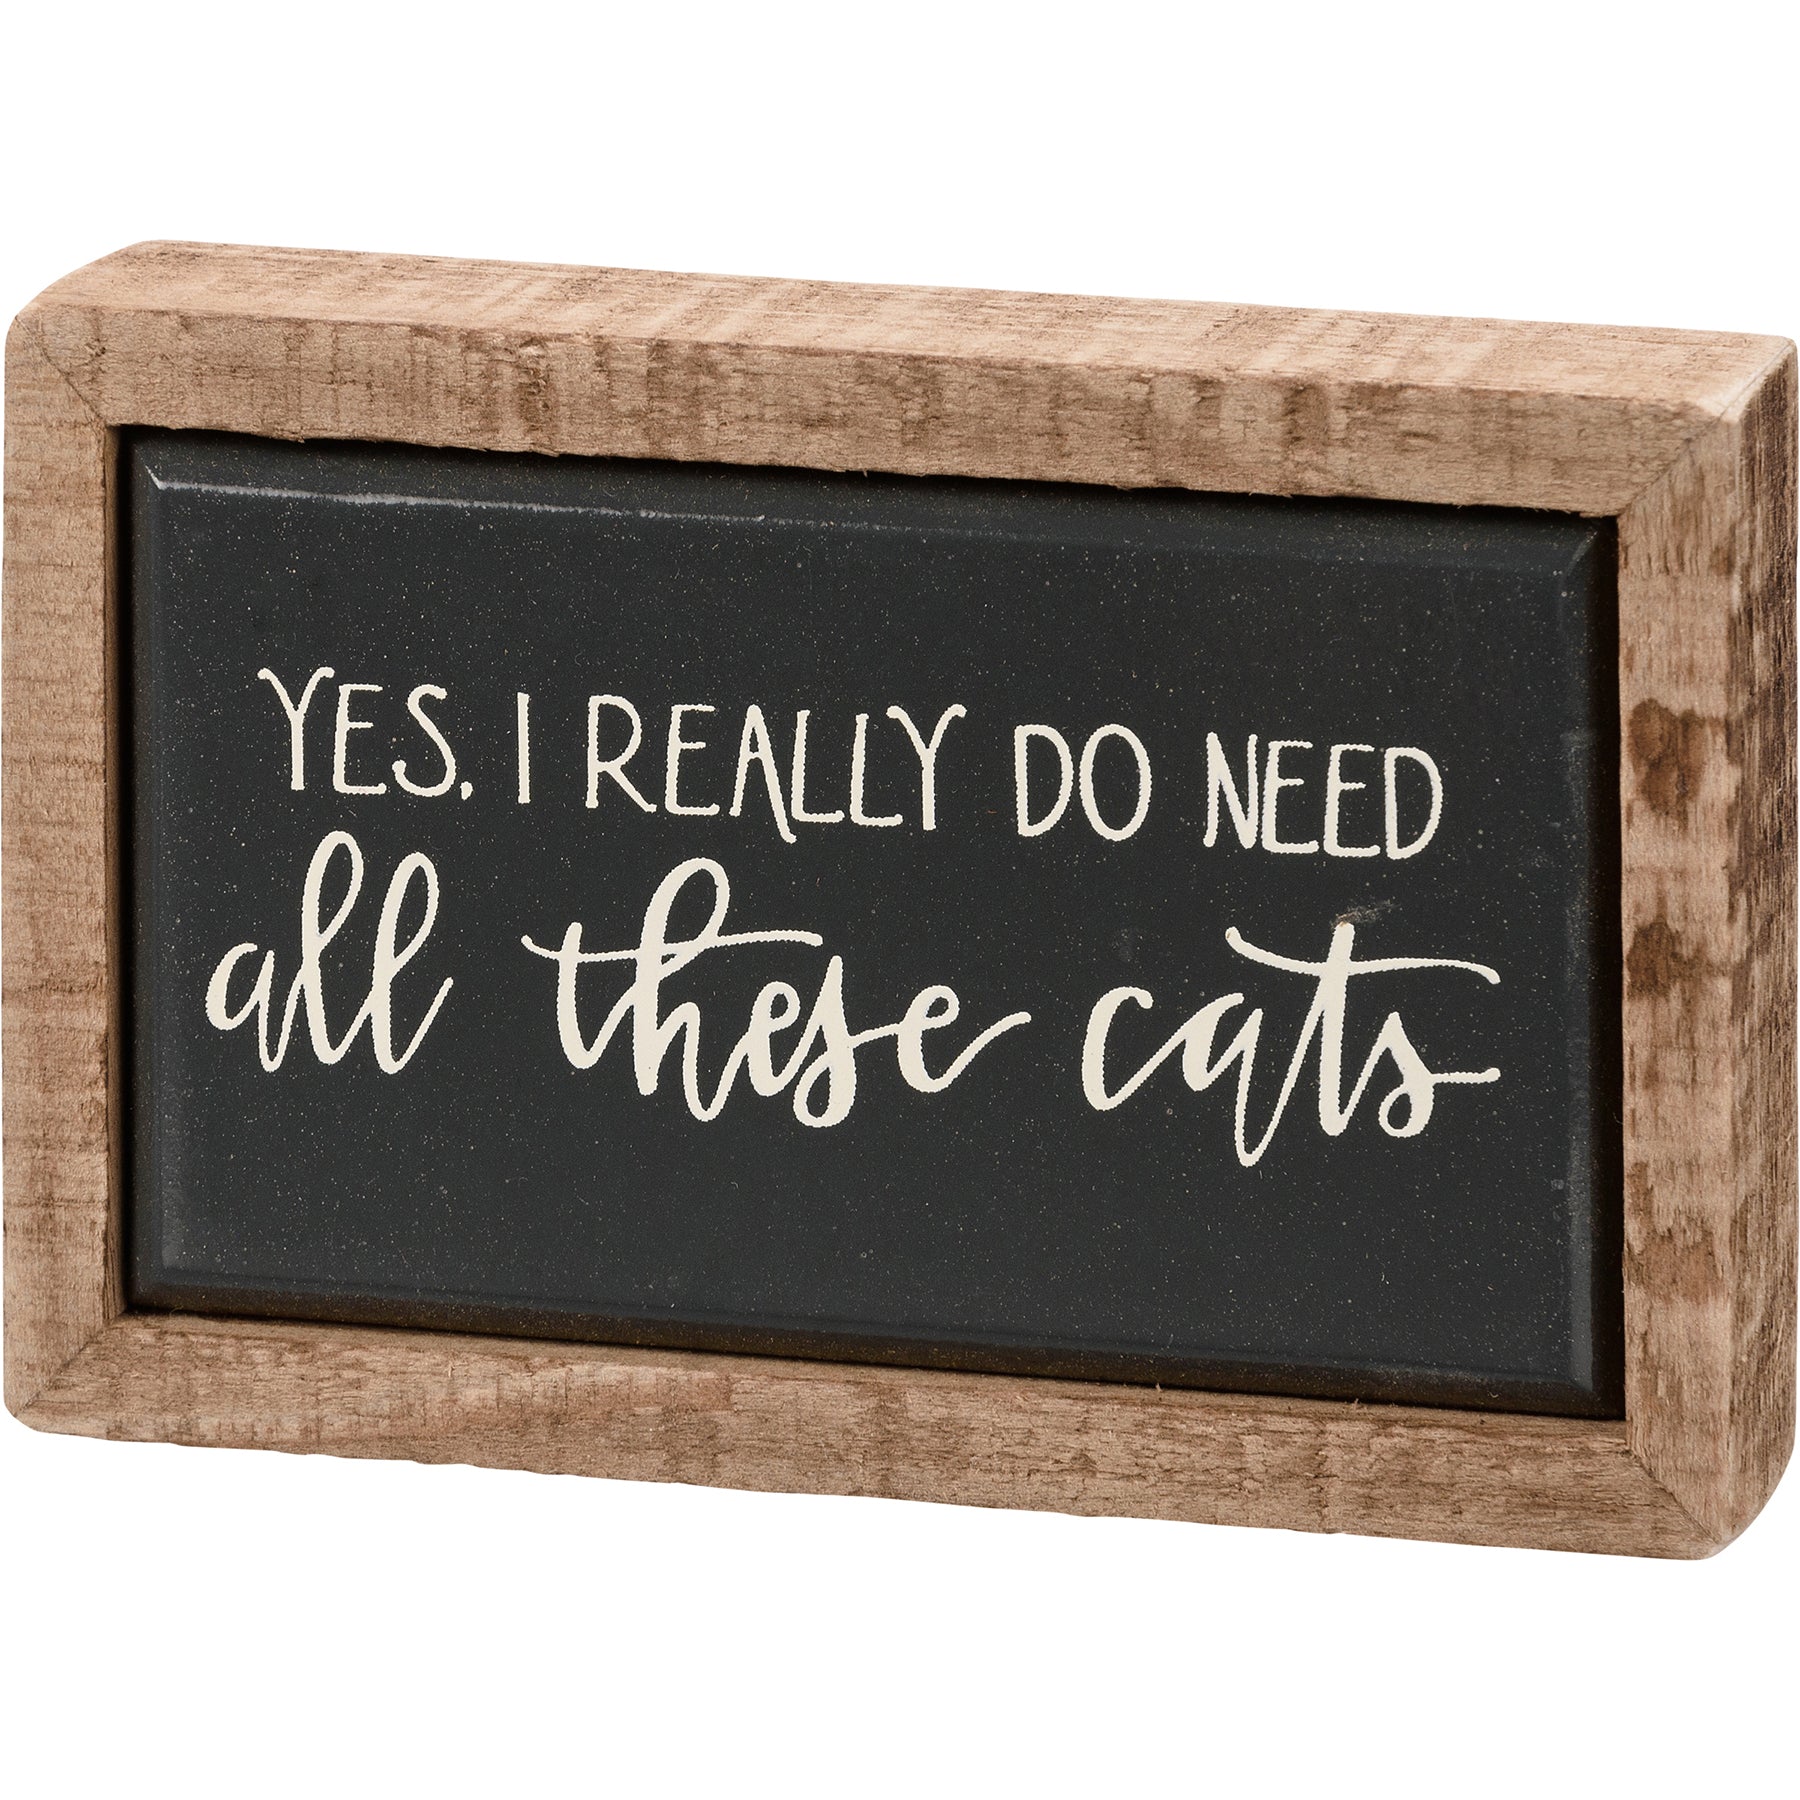 Yes I really do need all these cats funny wooden mini box sign